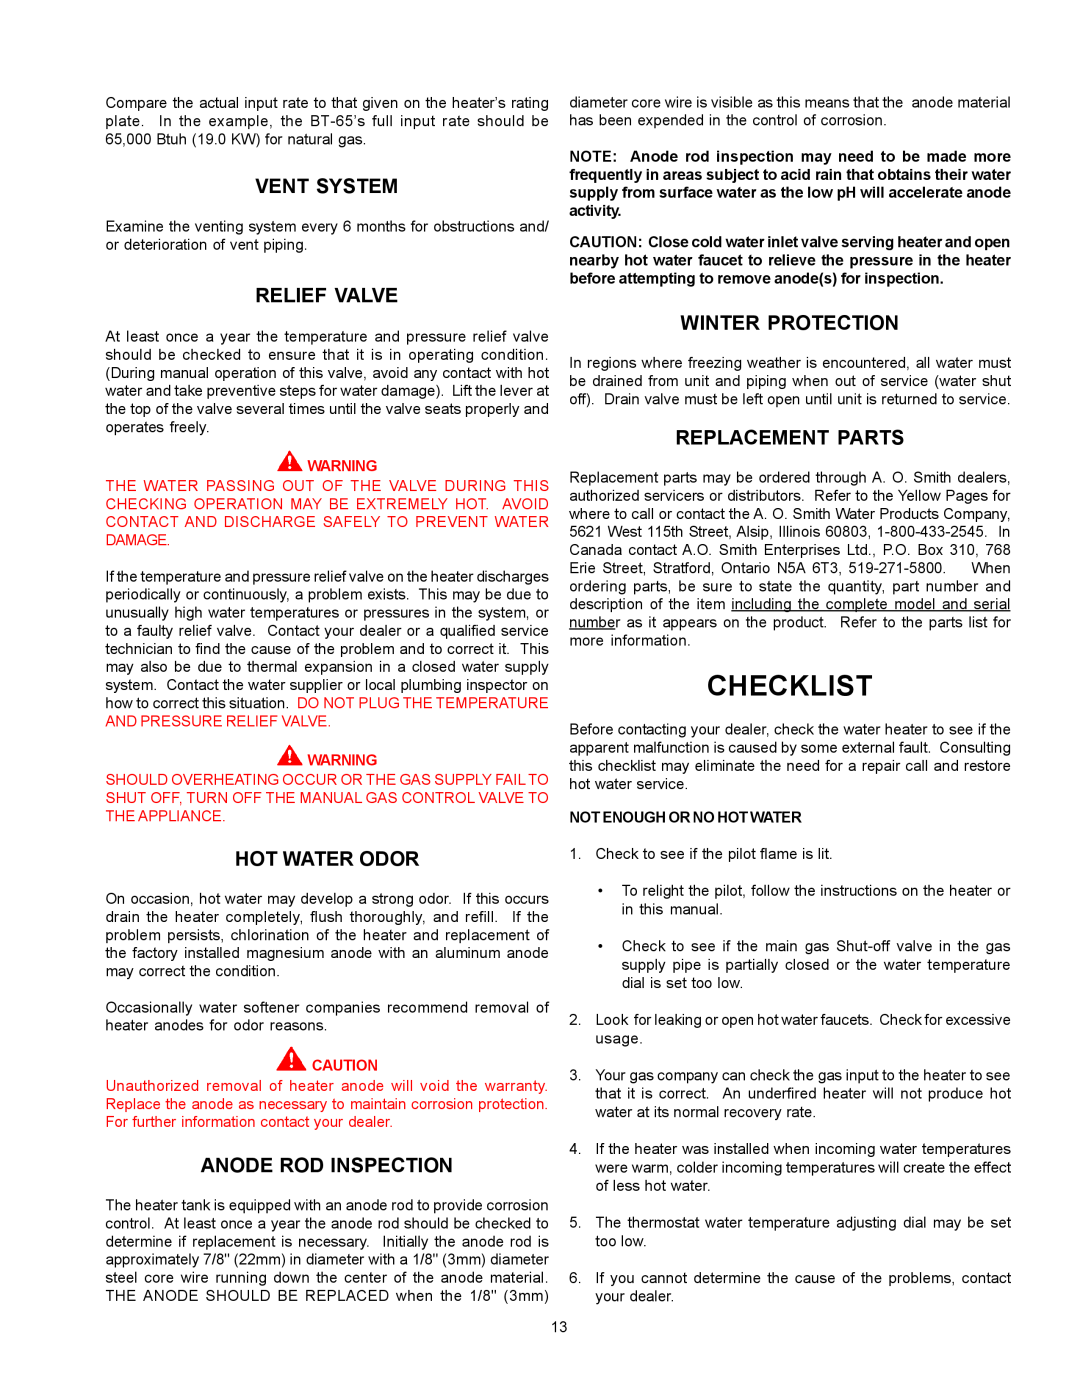 A.O. Smith BT- 65 Checklist, Vent System, Hot Water Odor, Anode Rod Inspection, Winter Protection, Replacement Parts 